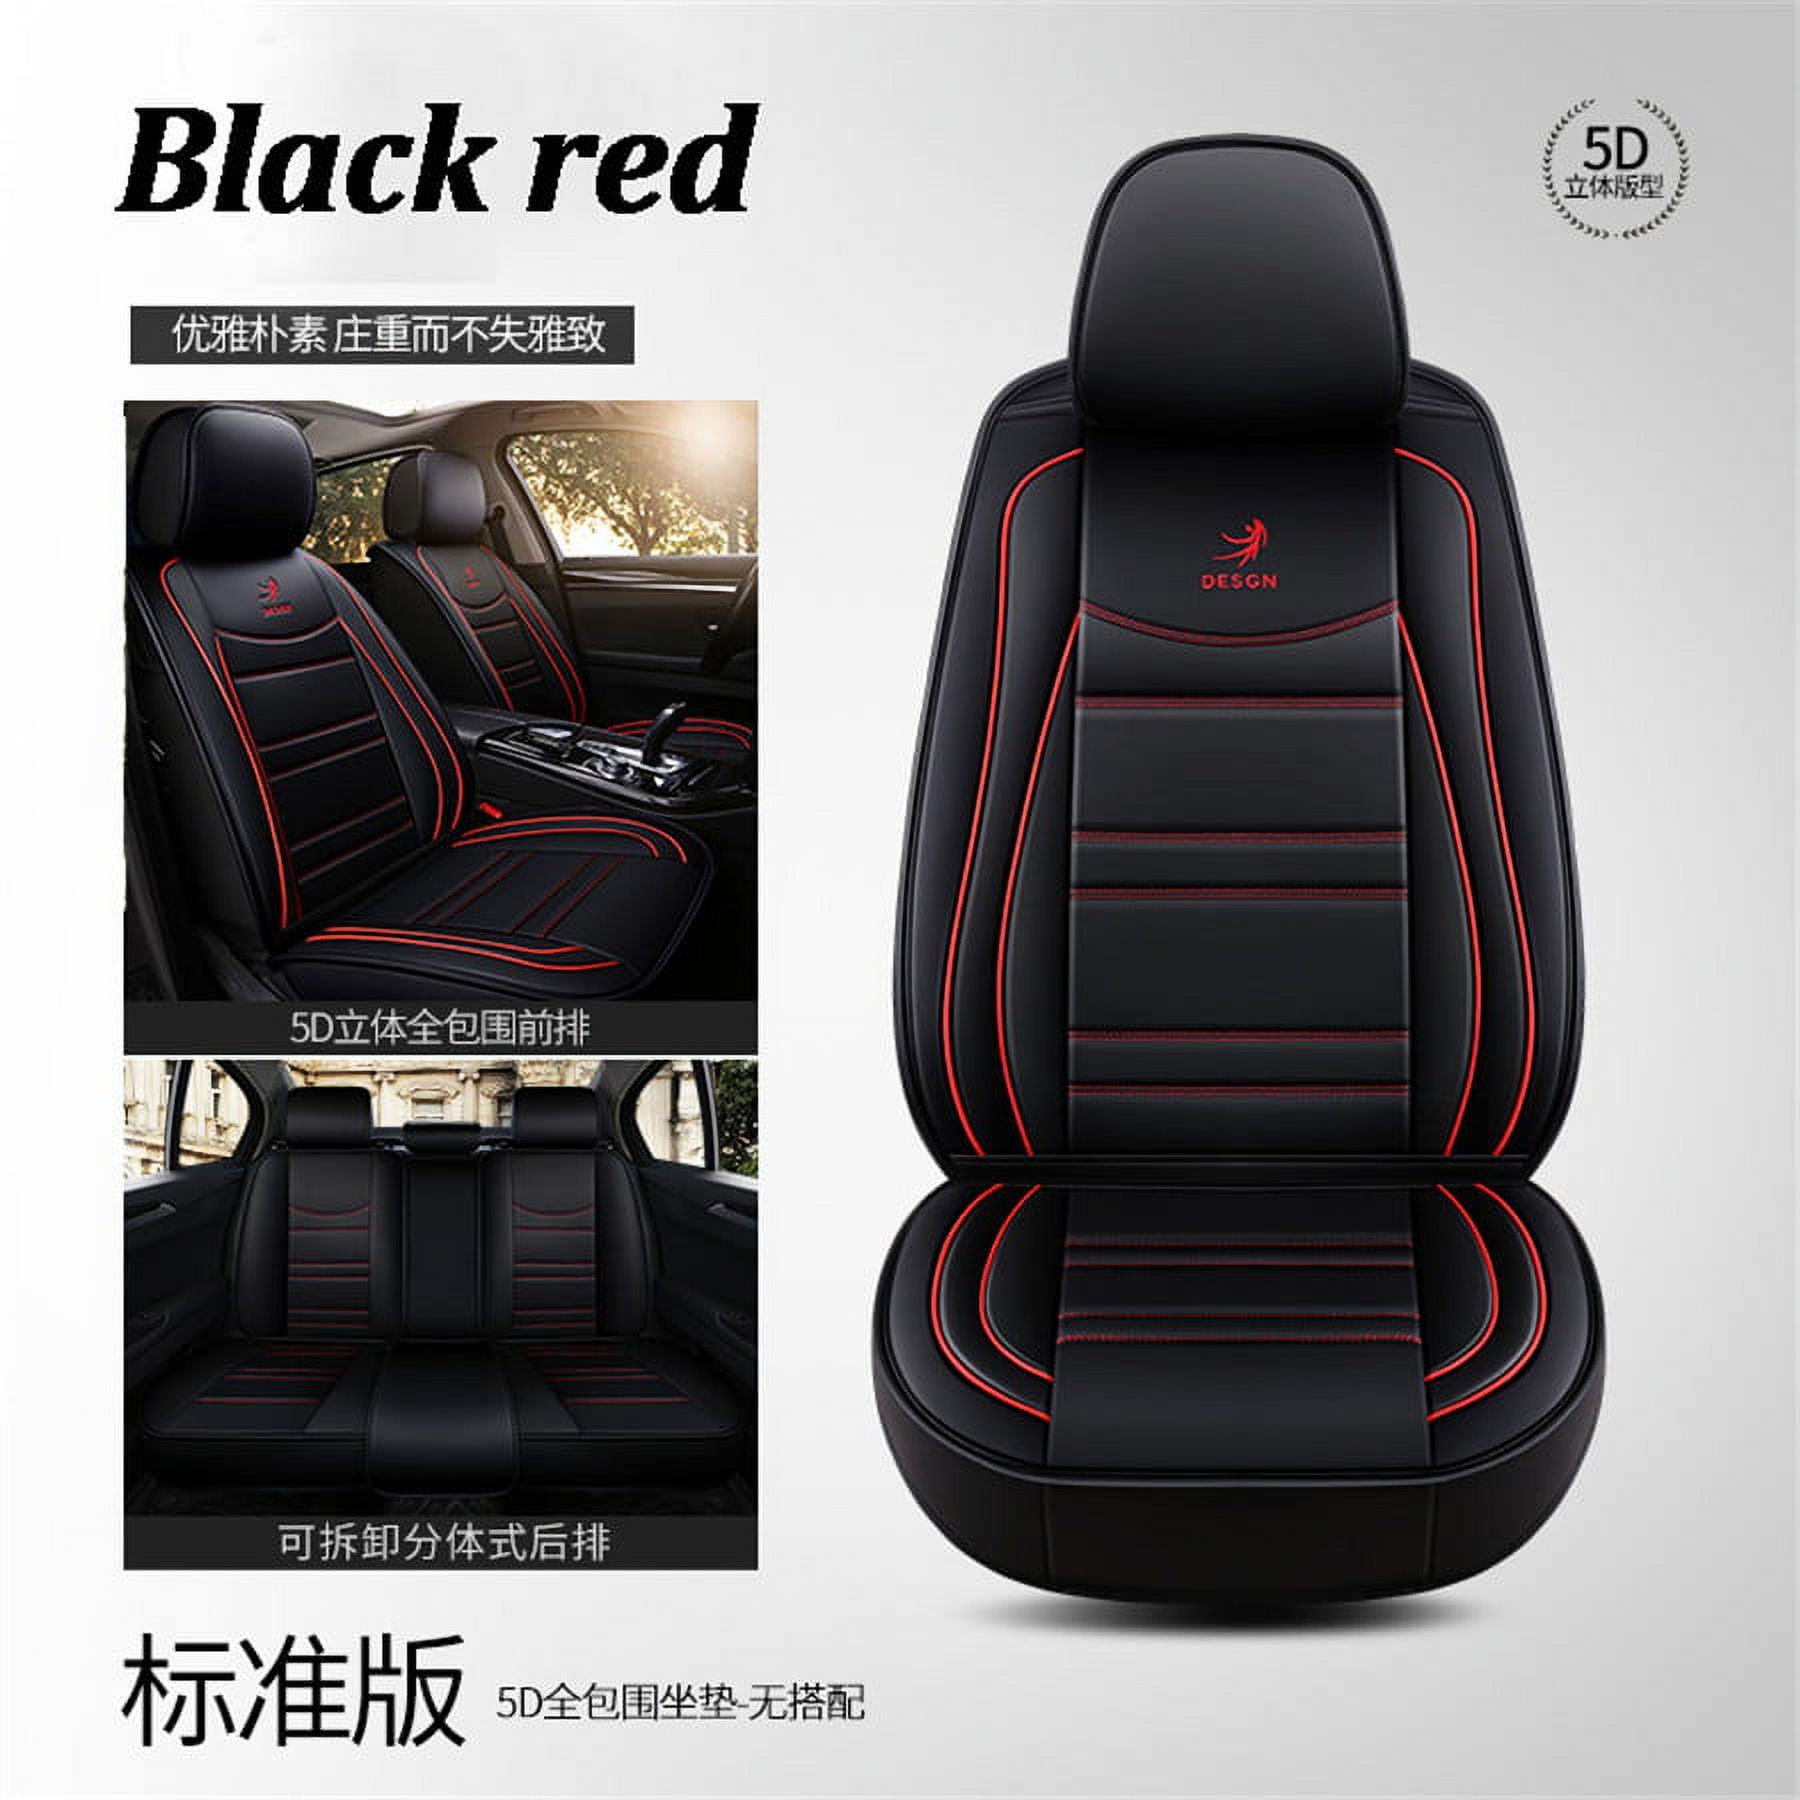  FLORICH Seat Covers for Cars, Waterproof Seat Covers, Leather  Car Seat Covers 2 Pack, Universal Seat Cushion Protector for Most Cars  Trucks SUV-Black&Red Line : Automotive